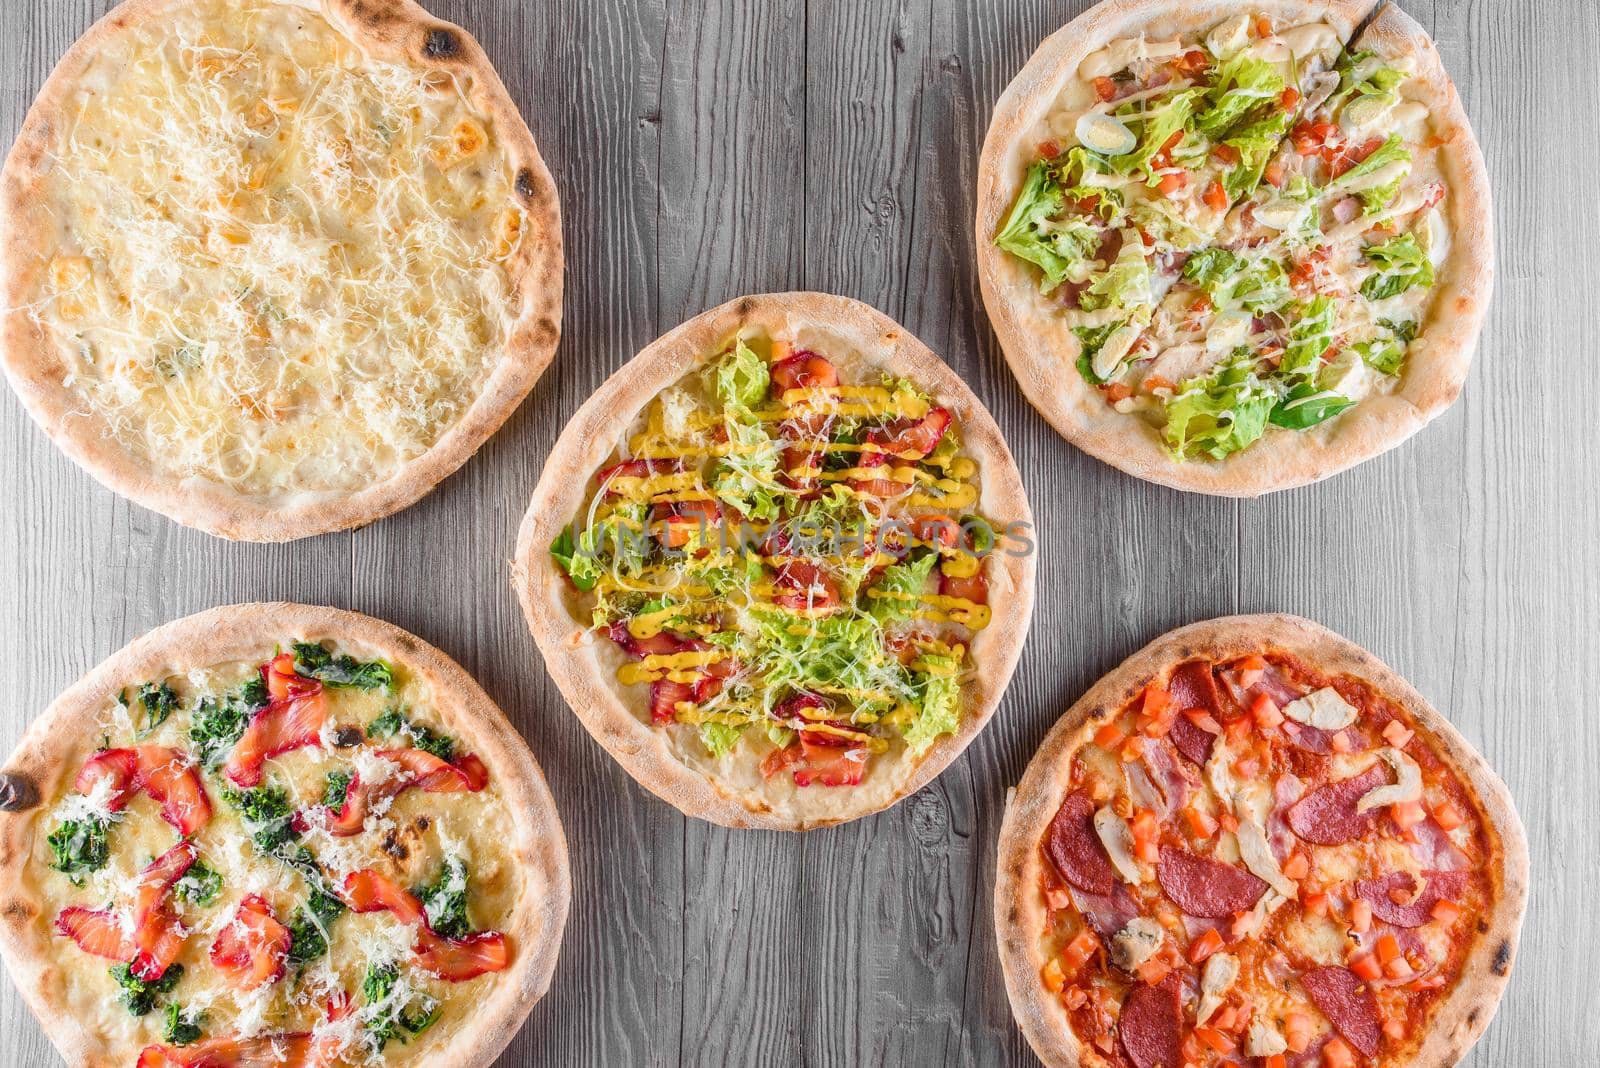 Assortment of pizza with meat, salami, prosciutto, tomatoes, dorblu cheese, mozzarella, parmesan and salad, spinach, red fish on wooden boards. Four cheese pizza, caesar, top view